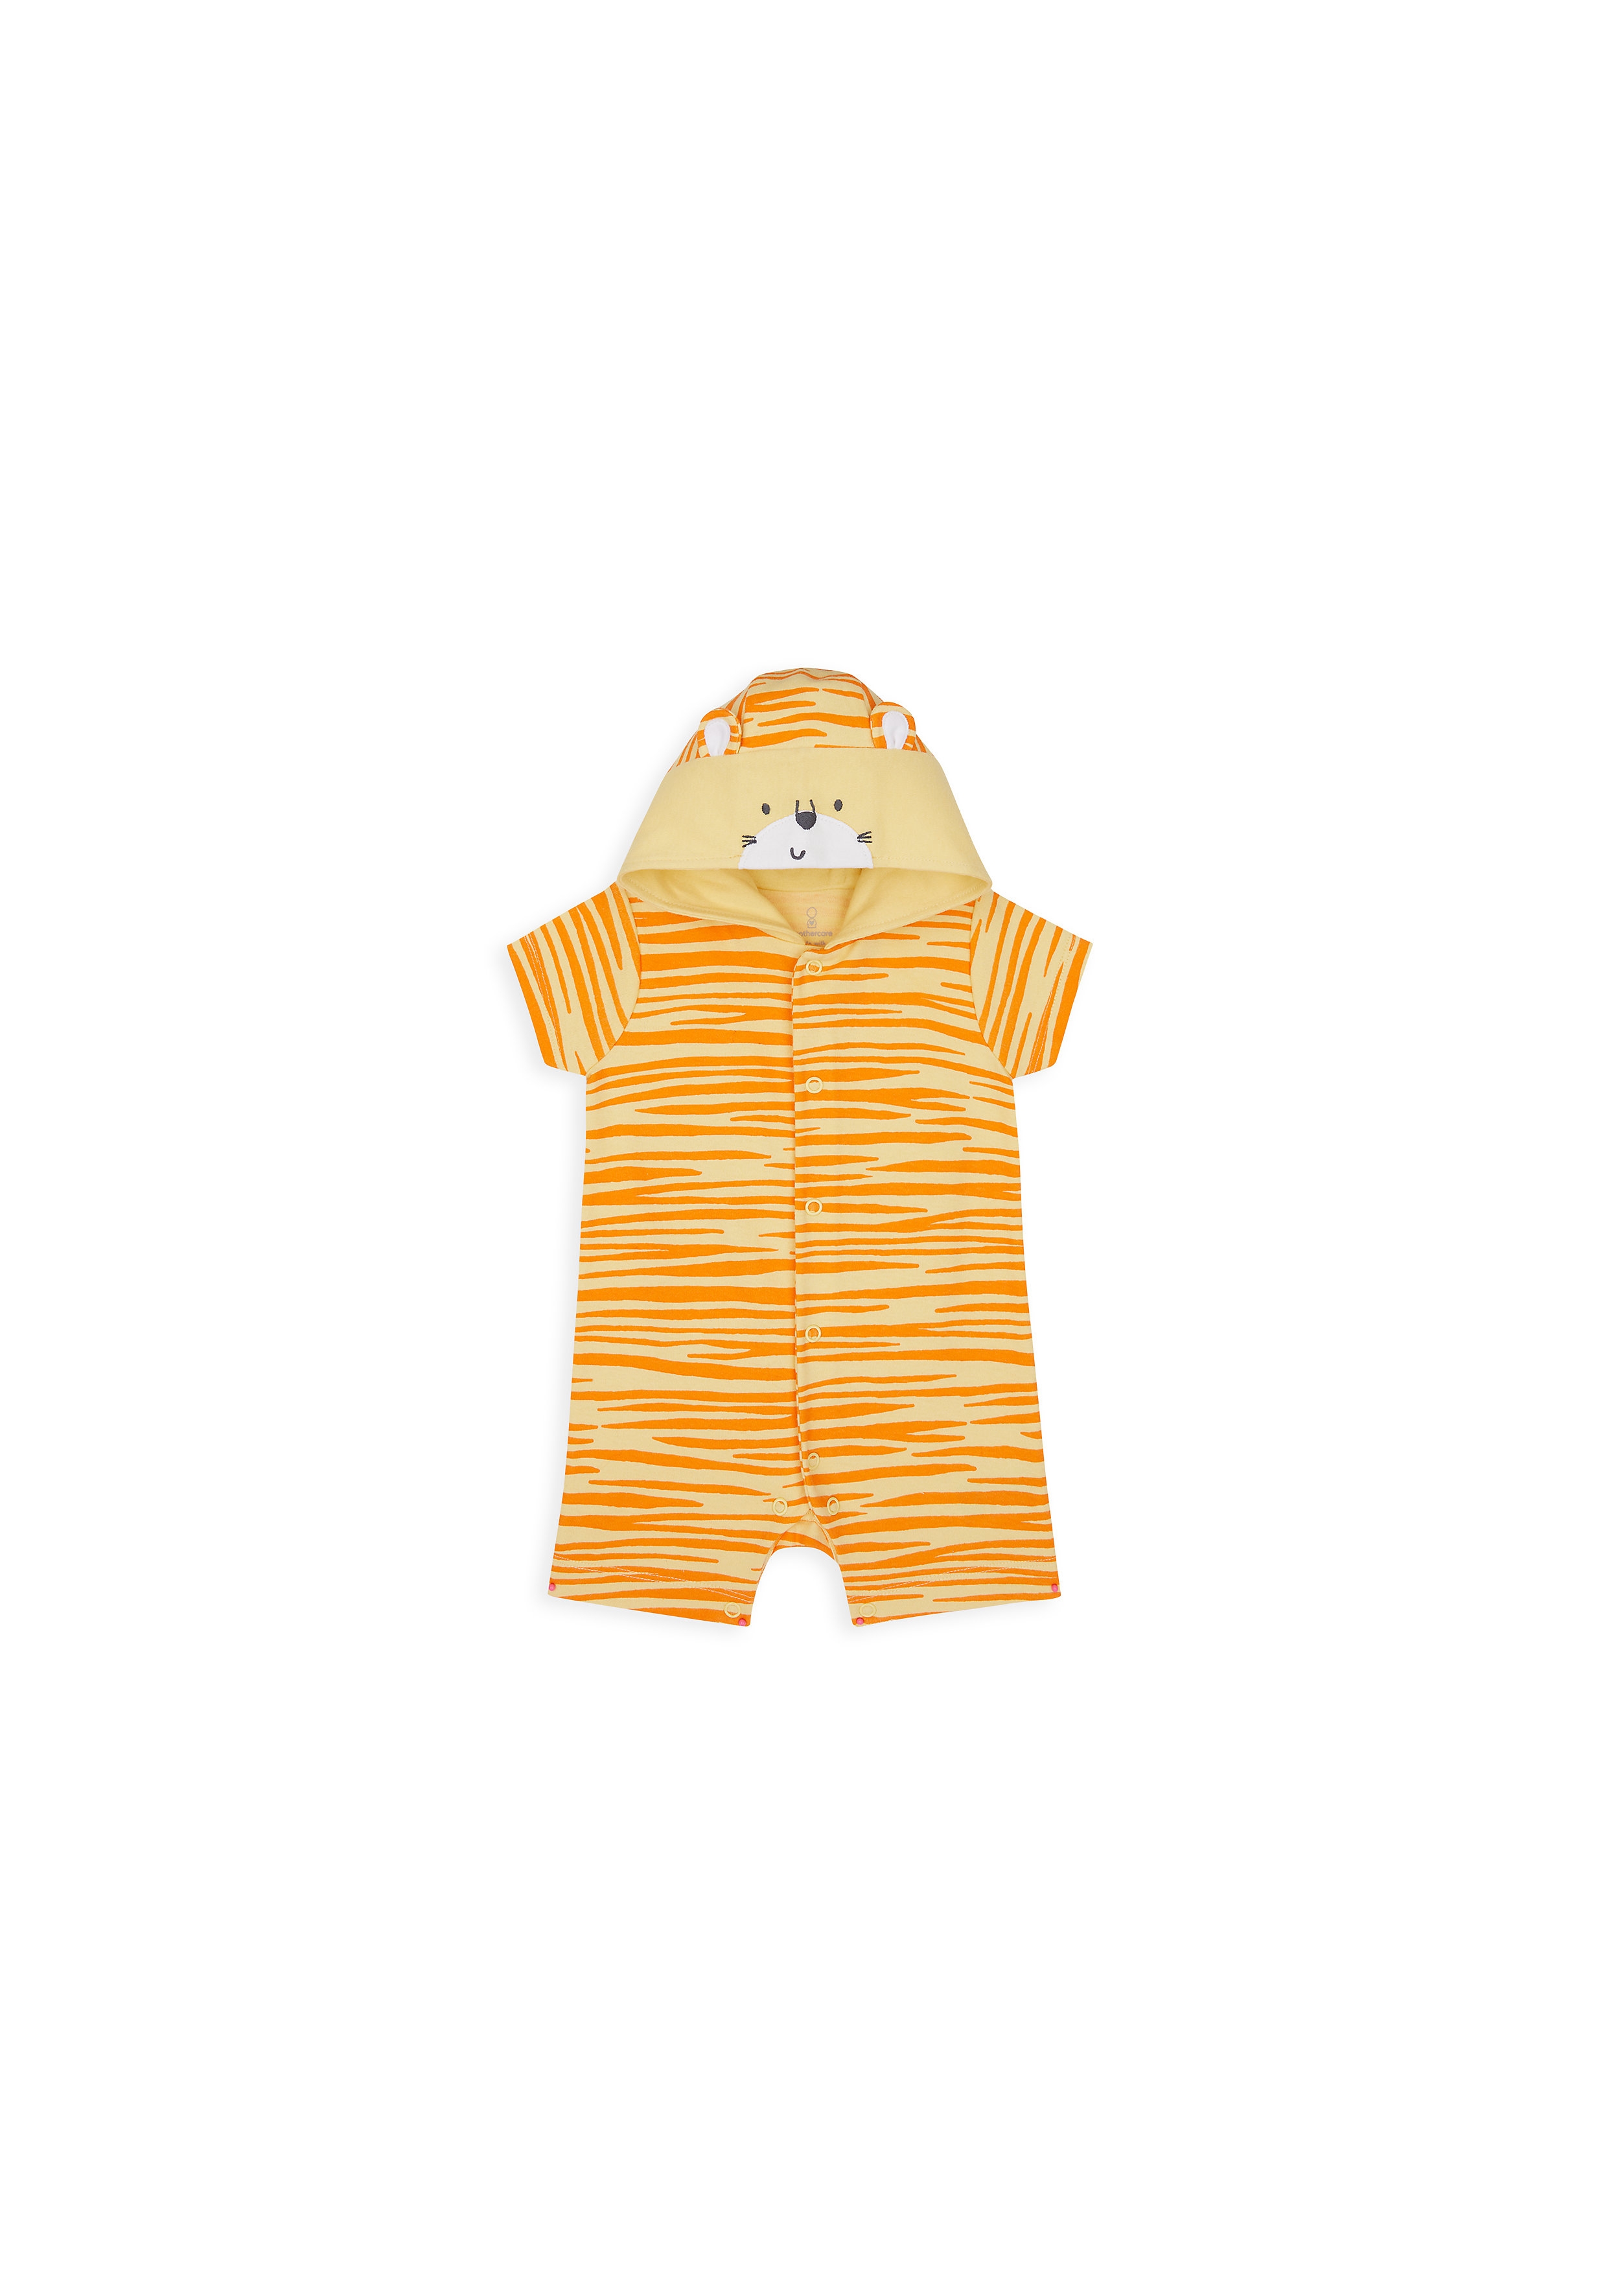 Mothercare | Unisex Half Sleeves Romper 3D Details - Yellow 0